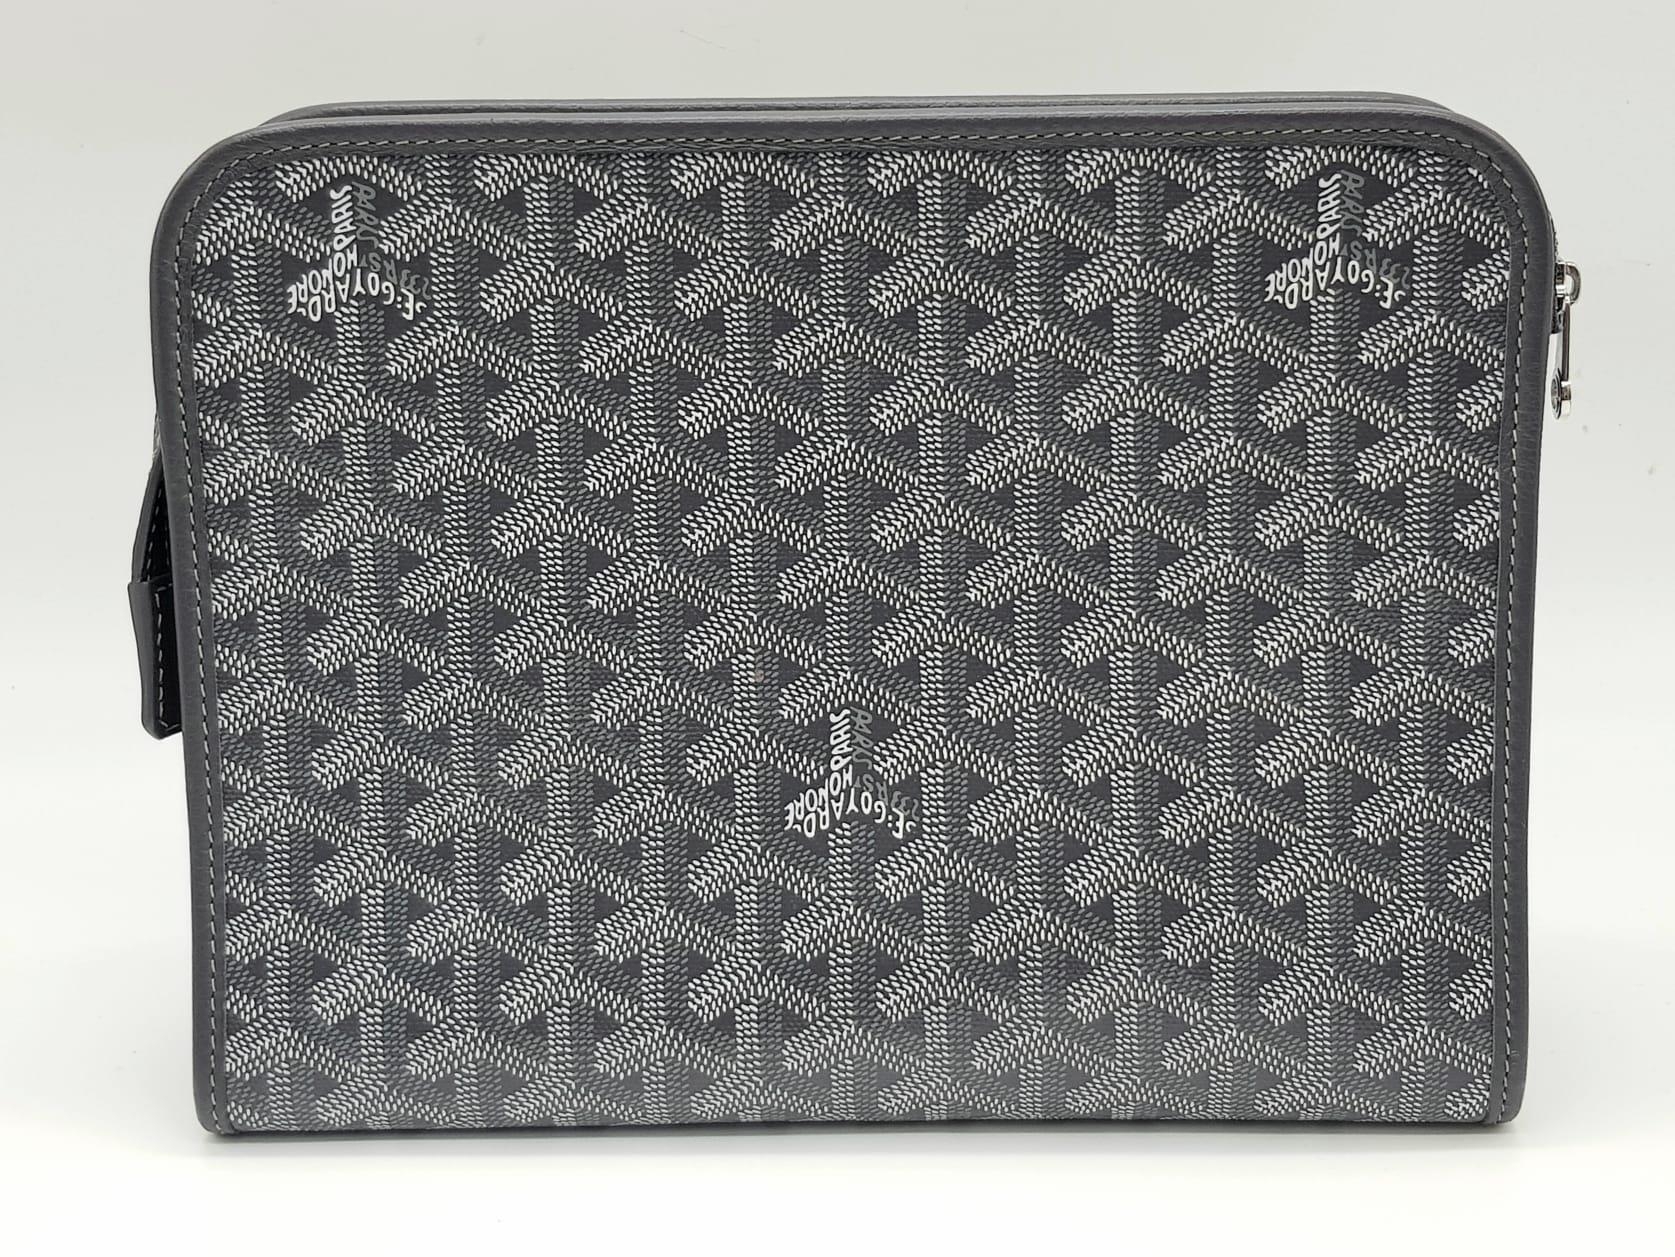 A Goyard Jouvence Grey Washbag. Grey and white geometric pattern on canvas. Water resistant inner - Image 3 of 8